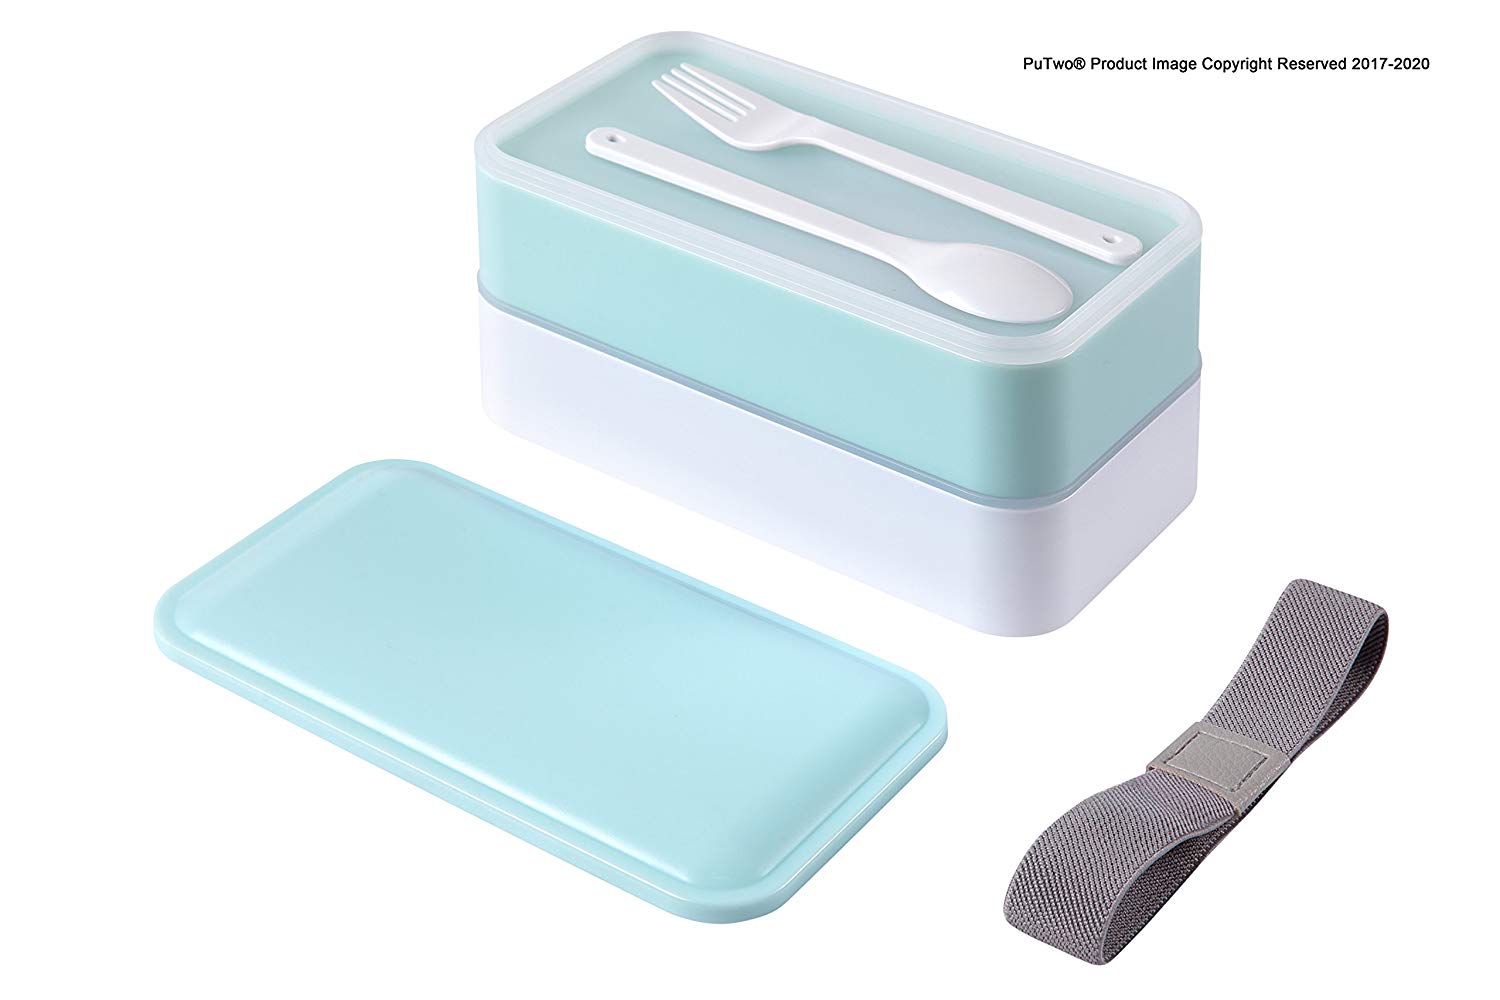 Bento Box 2 Tiers Bento Lunch Box Lunch Boxes with Reusable Cutlery Japanese Style for Microwave Freezer Dishwasher Bento Boxes for Kids Adults Work School - Pastel Blue PuTwo - image 4 of 6